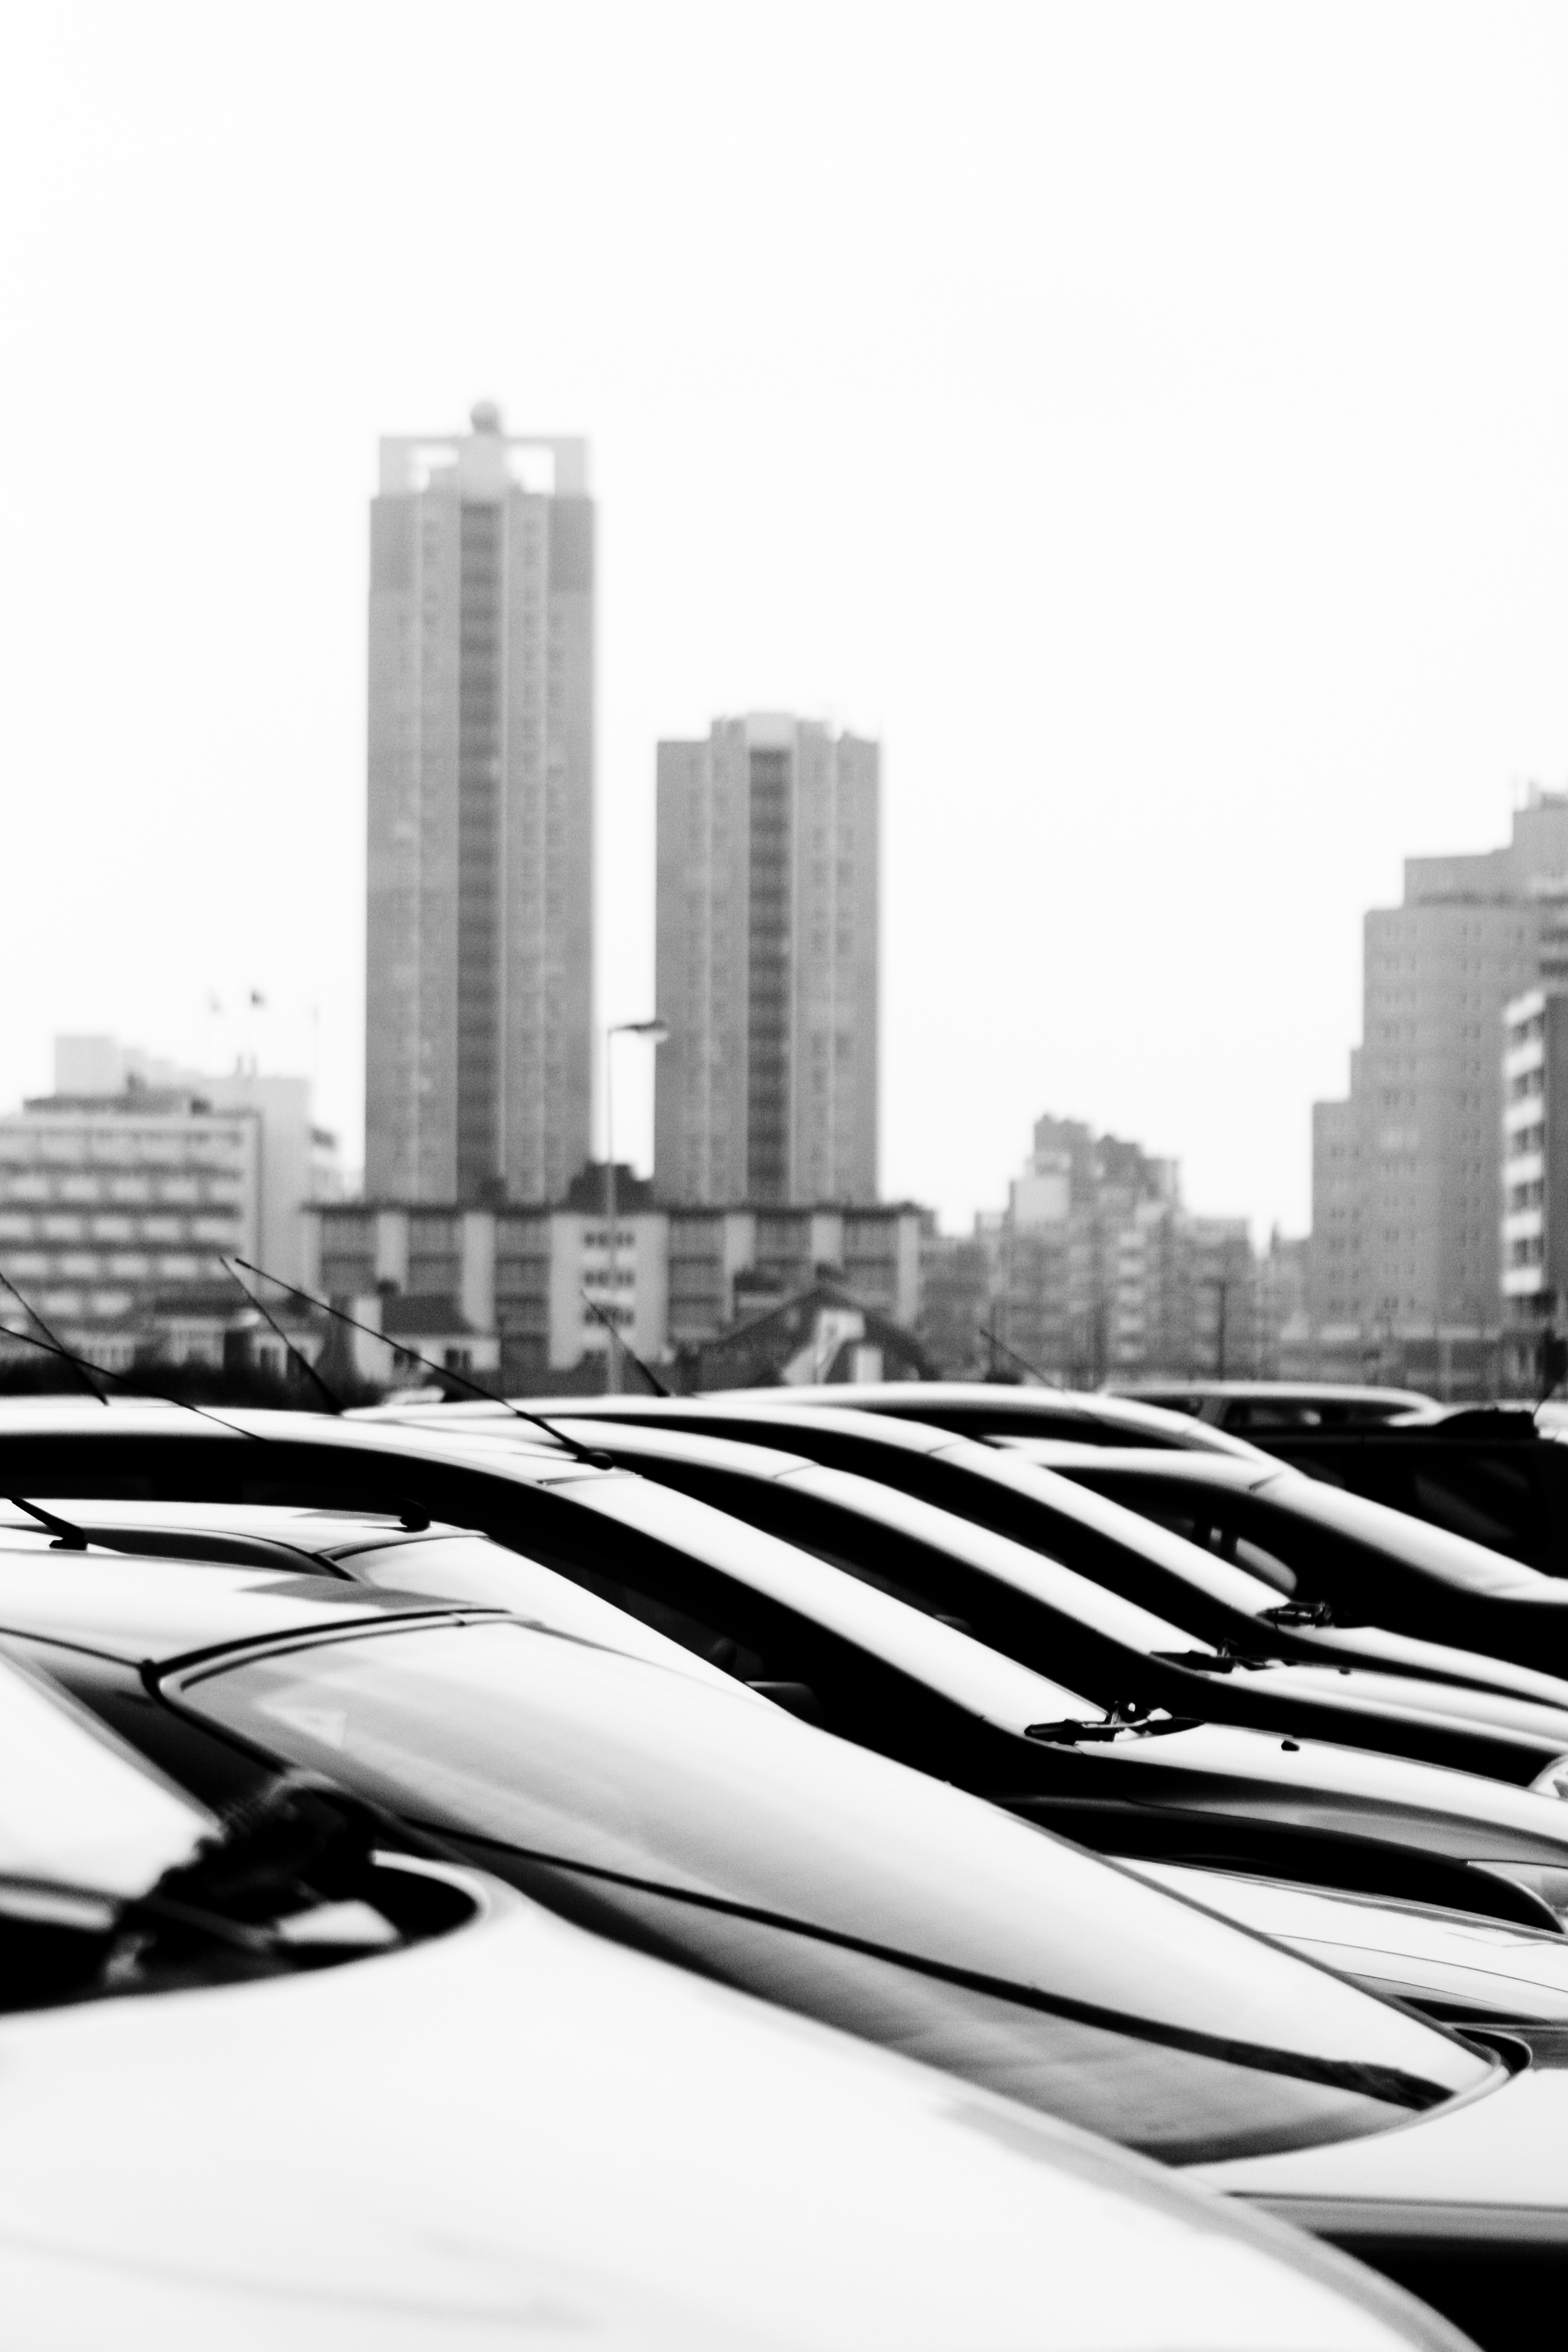 Parked cars in city, Apartment, Apartments, Building, Buildings, HQ Photo